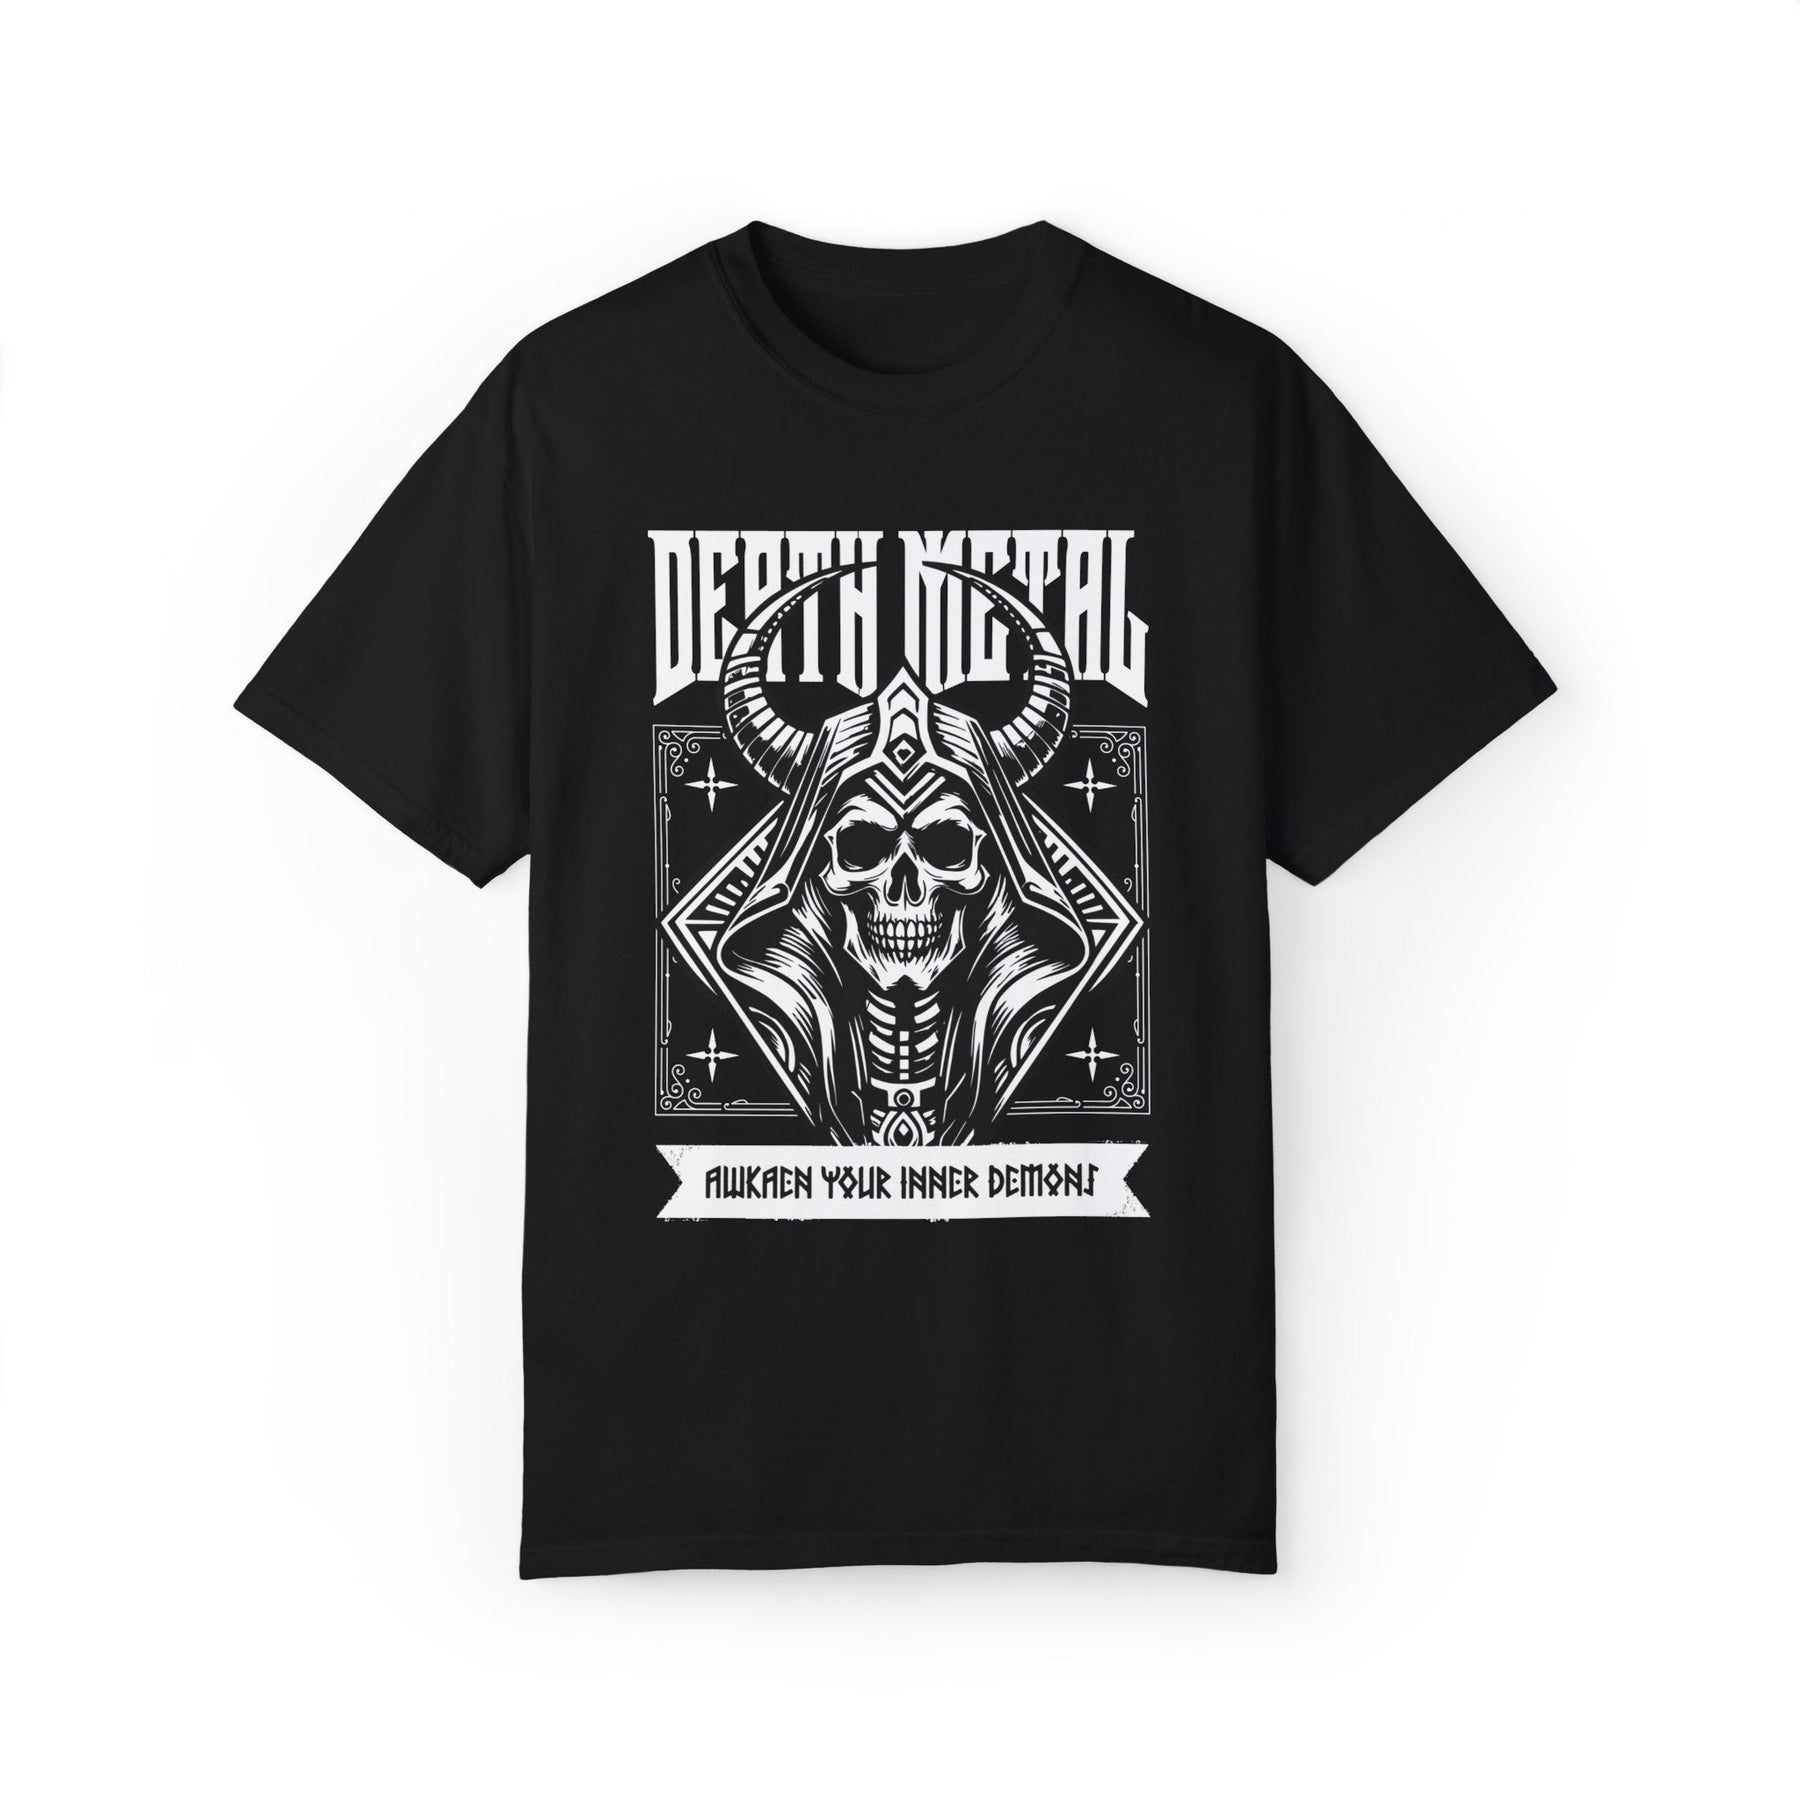 Death Metal Oversized Beefy Tee - Goth Cloth Co.T - Shirt13627424990288678383